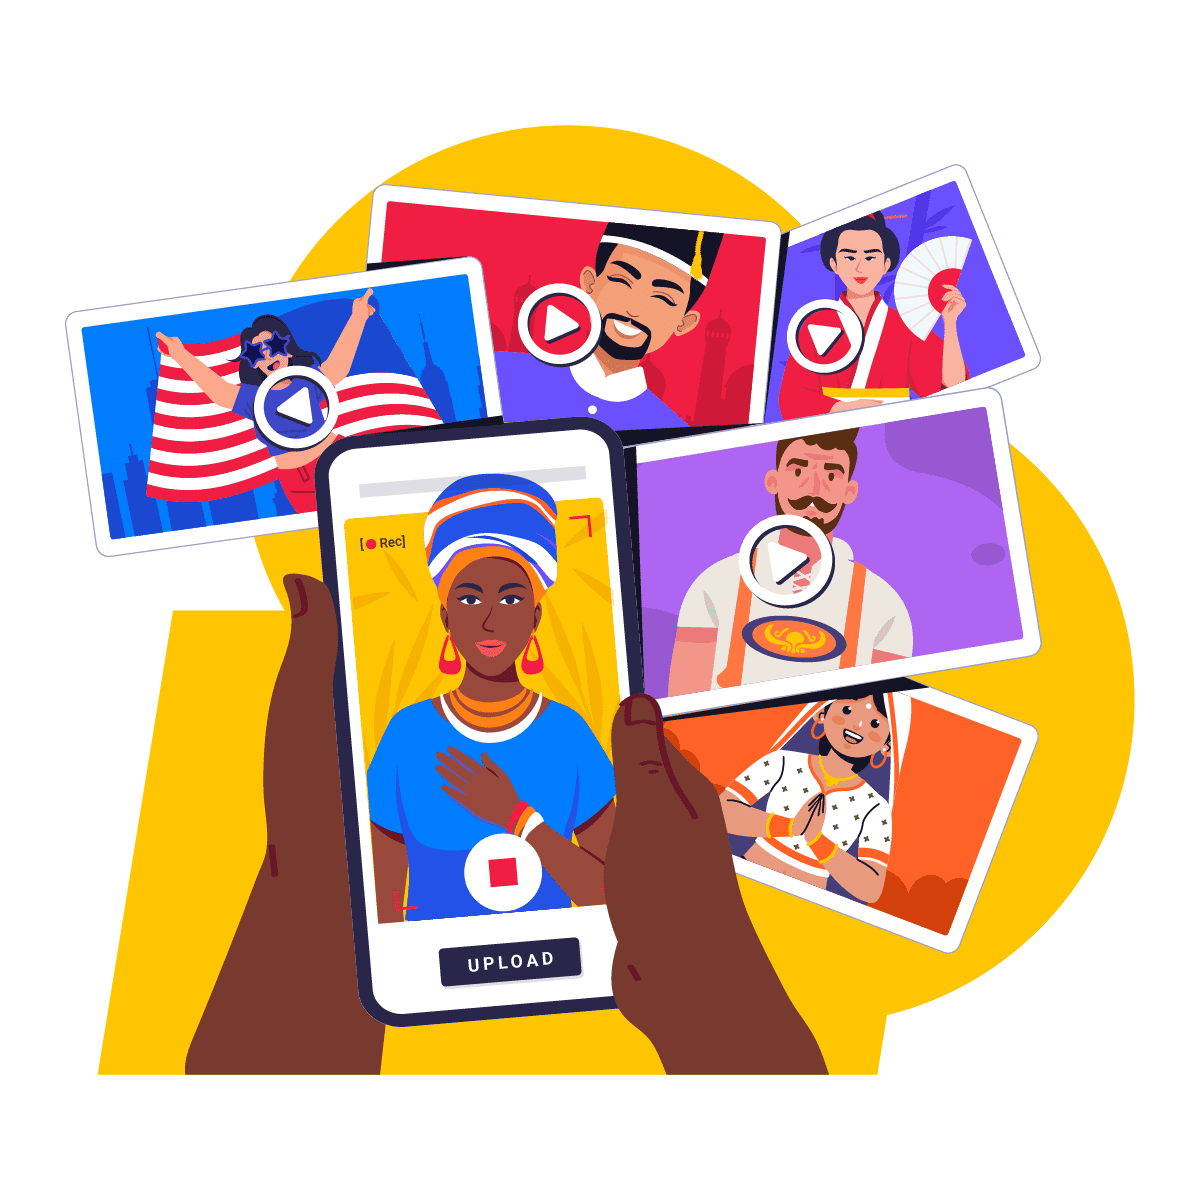 Collect community stories from your citizens